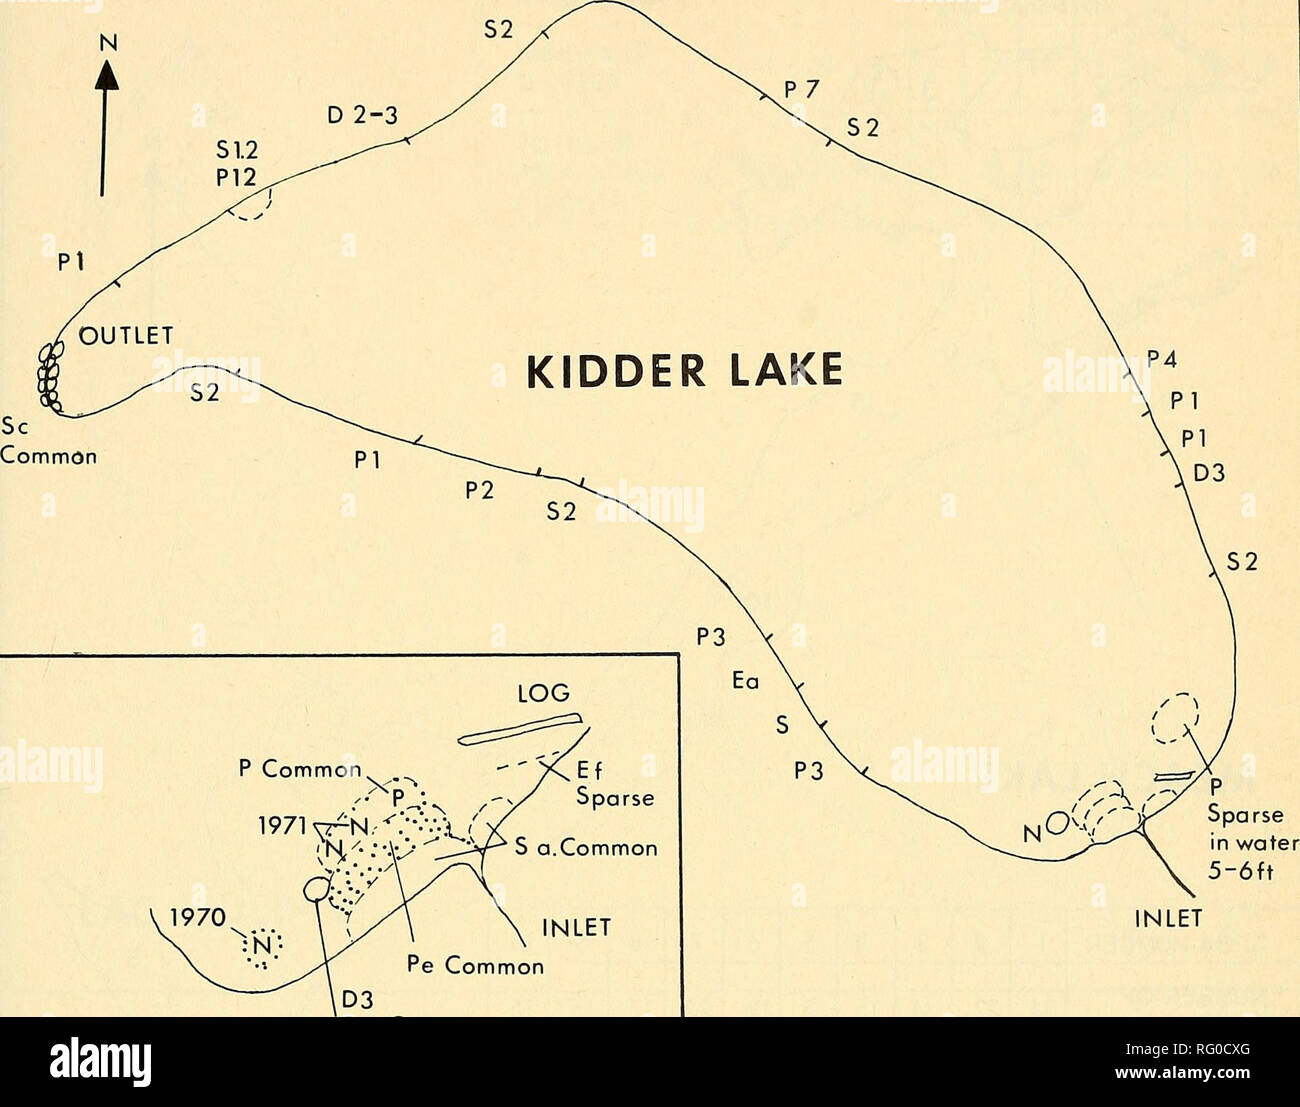 . The Canadian field-naturalist. 1974 Aiken and Gillett: Aquatic Plants in Gatineau Park 443. Pe Common Ea Common INLET Figure 3. Map of Kidder Lake. A number after an abbreviation signifies the number of plants of the species at that site; for example, P4 indicates four plants of Potamogeton amplifolius. D=Dulichium arundinaceum, Ea=Eleocharis acicularis, Ei=Equisetumfluviatile, N=Nuphar variegatum, P=Potamogeton amplifolius, Pe=P. epihydrus, S=Spar- ganium (did not fruit in 1971), Sa=5. androcladum, Sc=Sparganium chlorocarpum, Sl=Sagittaria latifolia. of this plant occurred in several other  Stock Photo